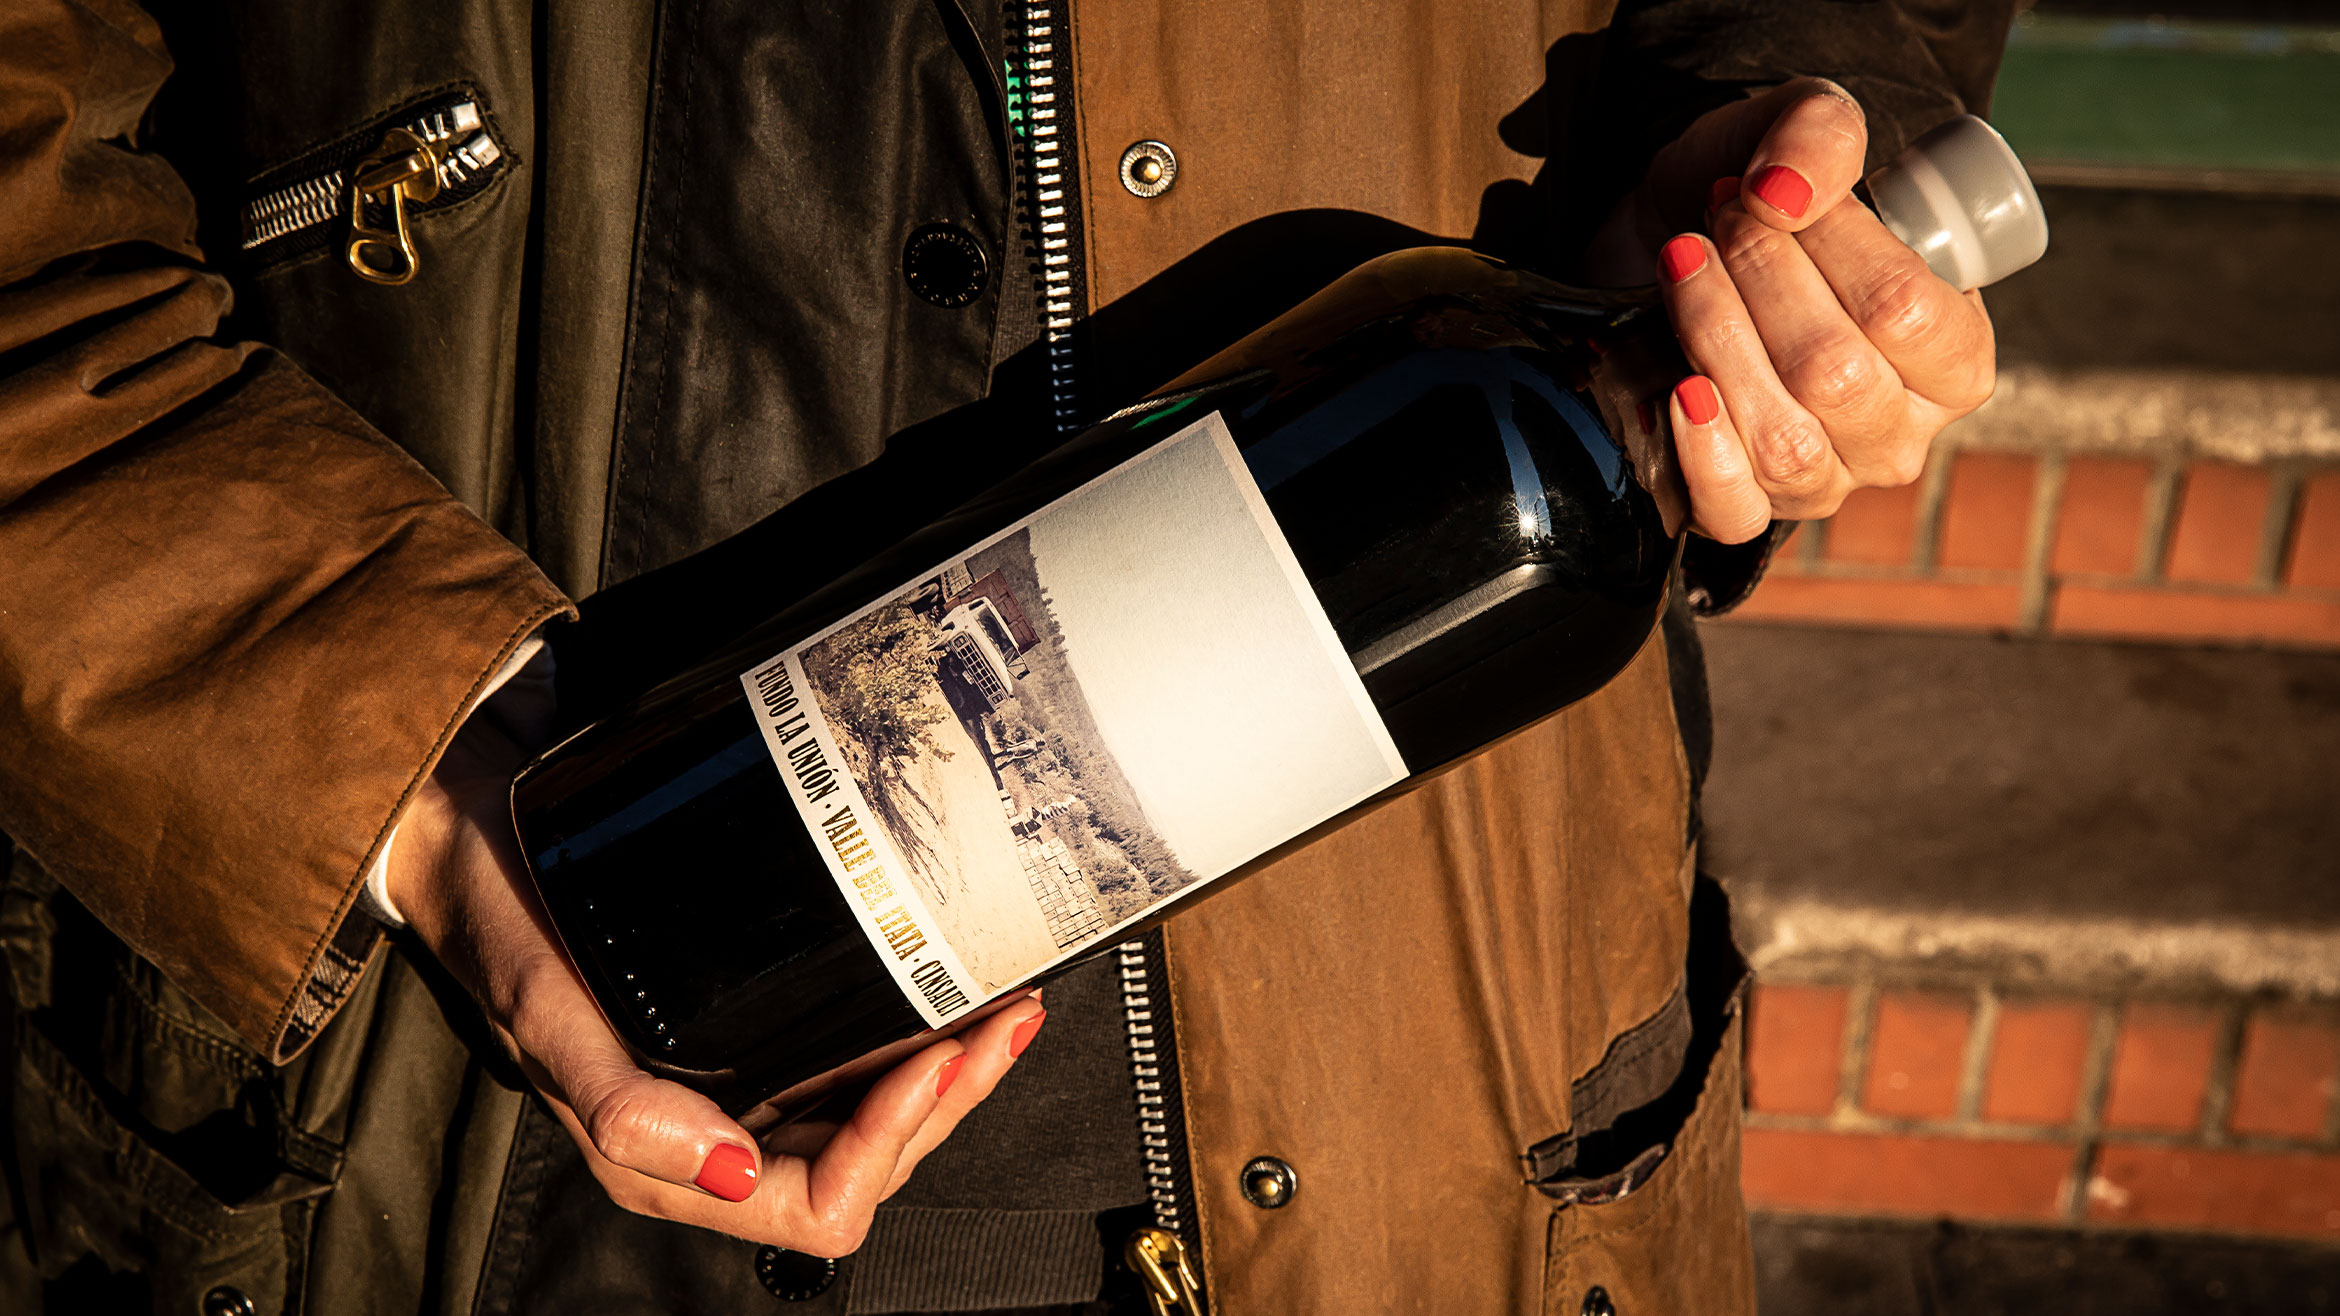 A person holds a bottle of wine